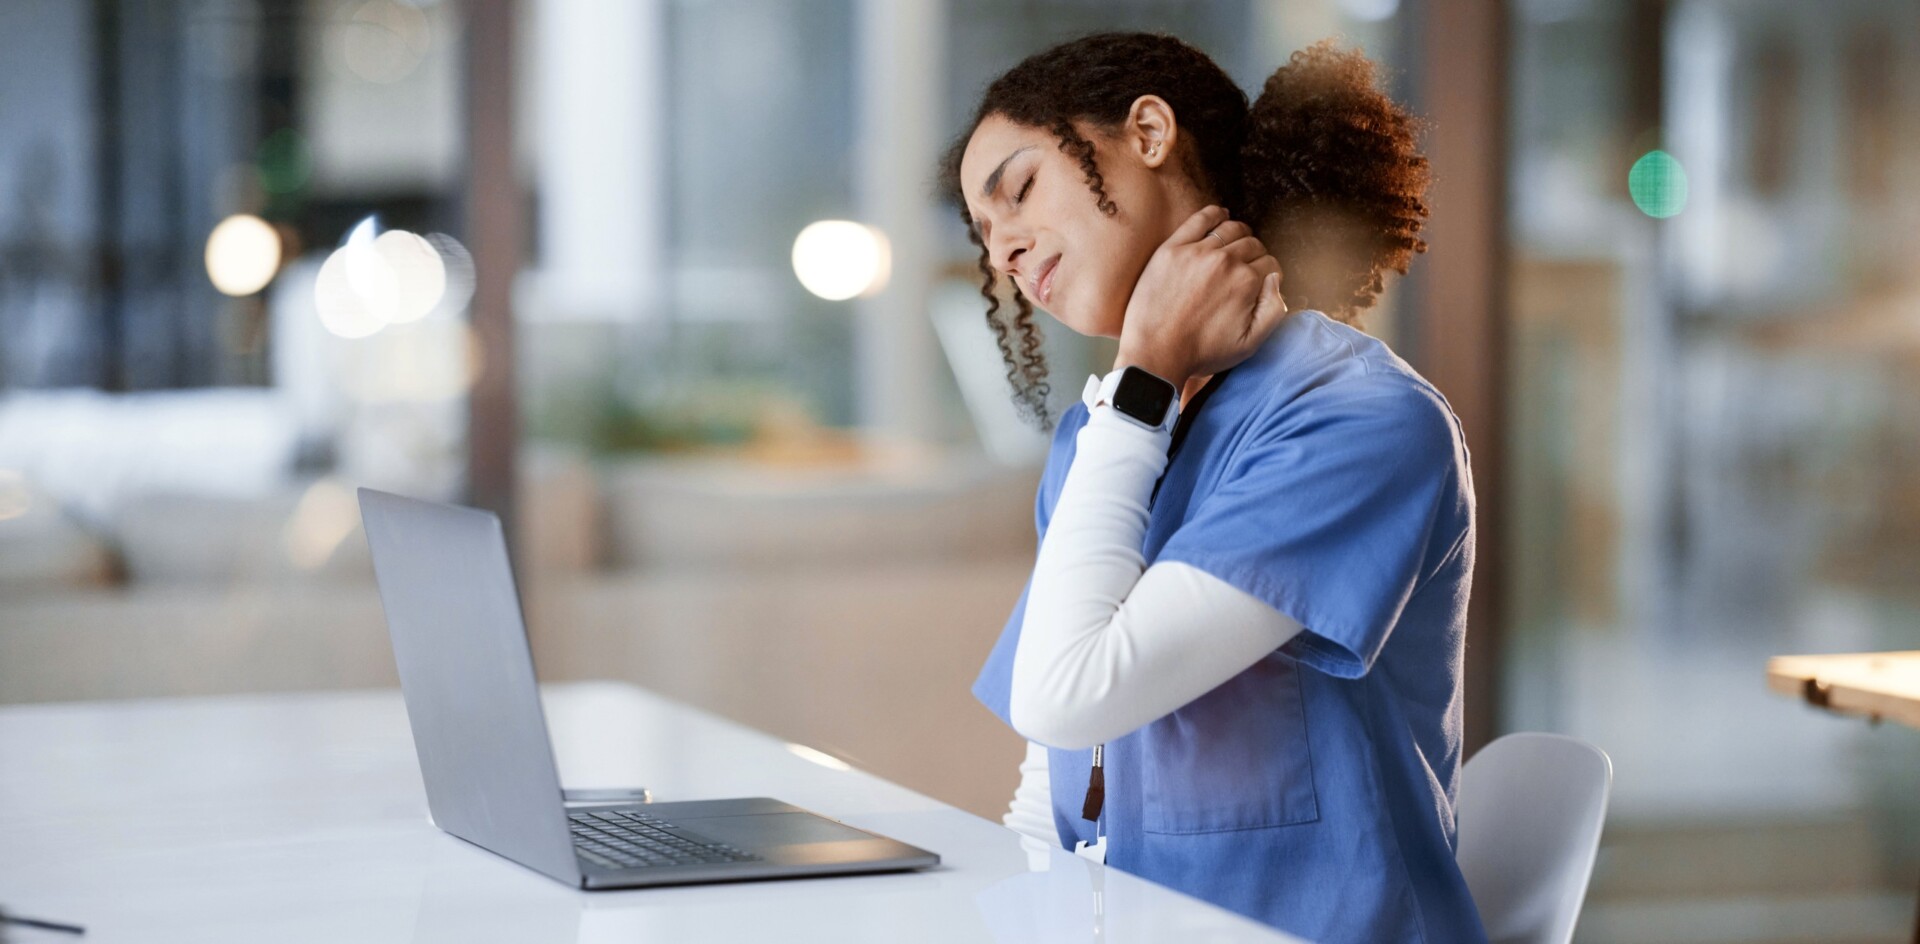 Employee burnout : Healthcare, black woman and doctor with neck pain, burnout or overworked in hospital, laptop or mus.